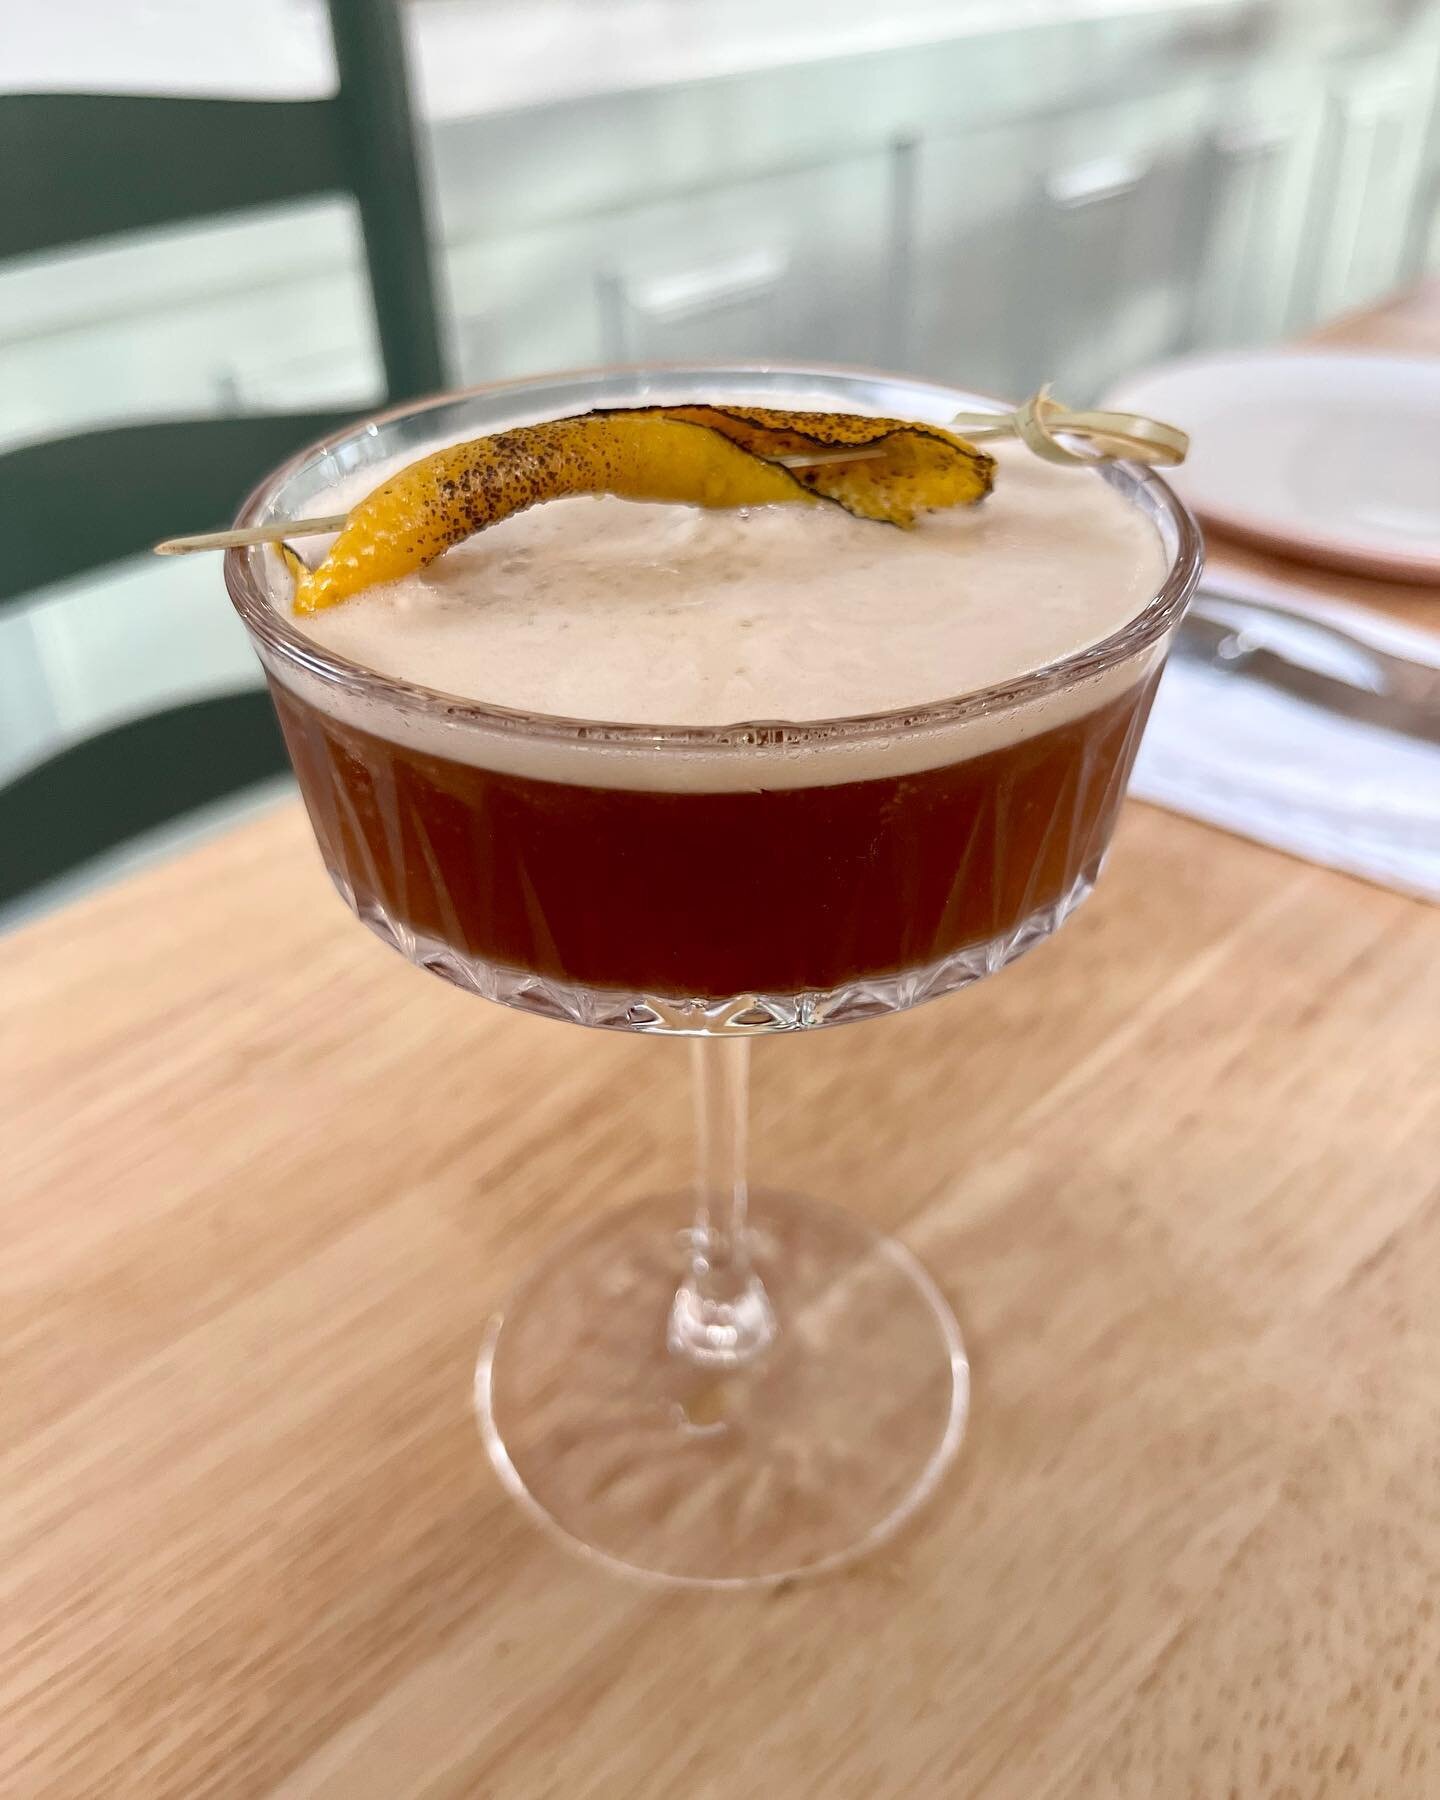 Did you know Ya Hala has ✨signature cocktails✨? It&rsquo;s true! This beauty is our Turkish Coffee Martini! Made with cardamom, rose, Turkish coffee, and Monopolowa vodka, we can&rsquo;t help but crave it!